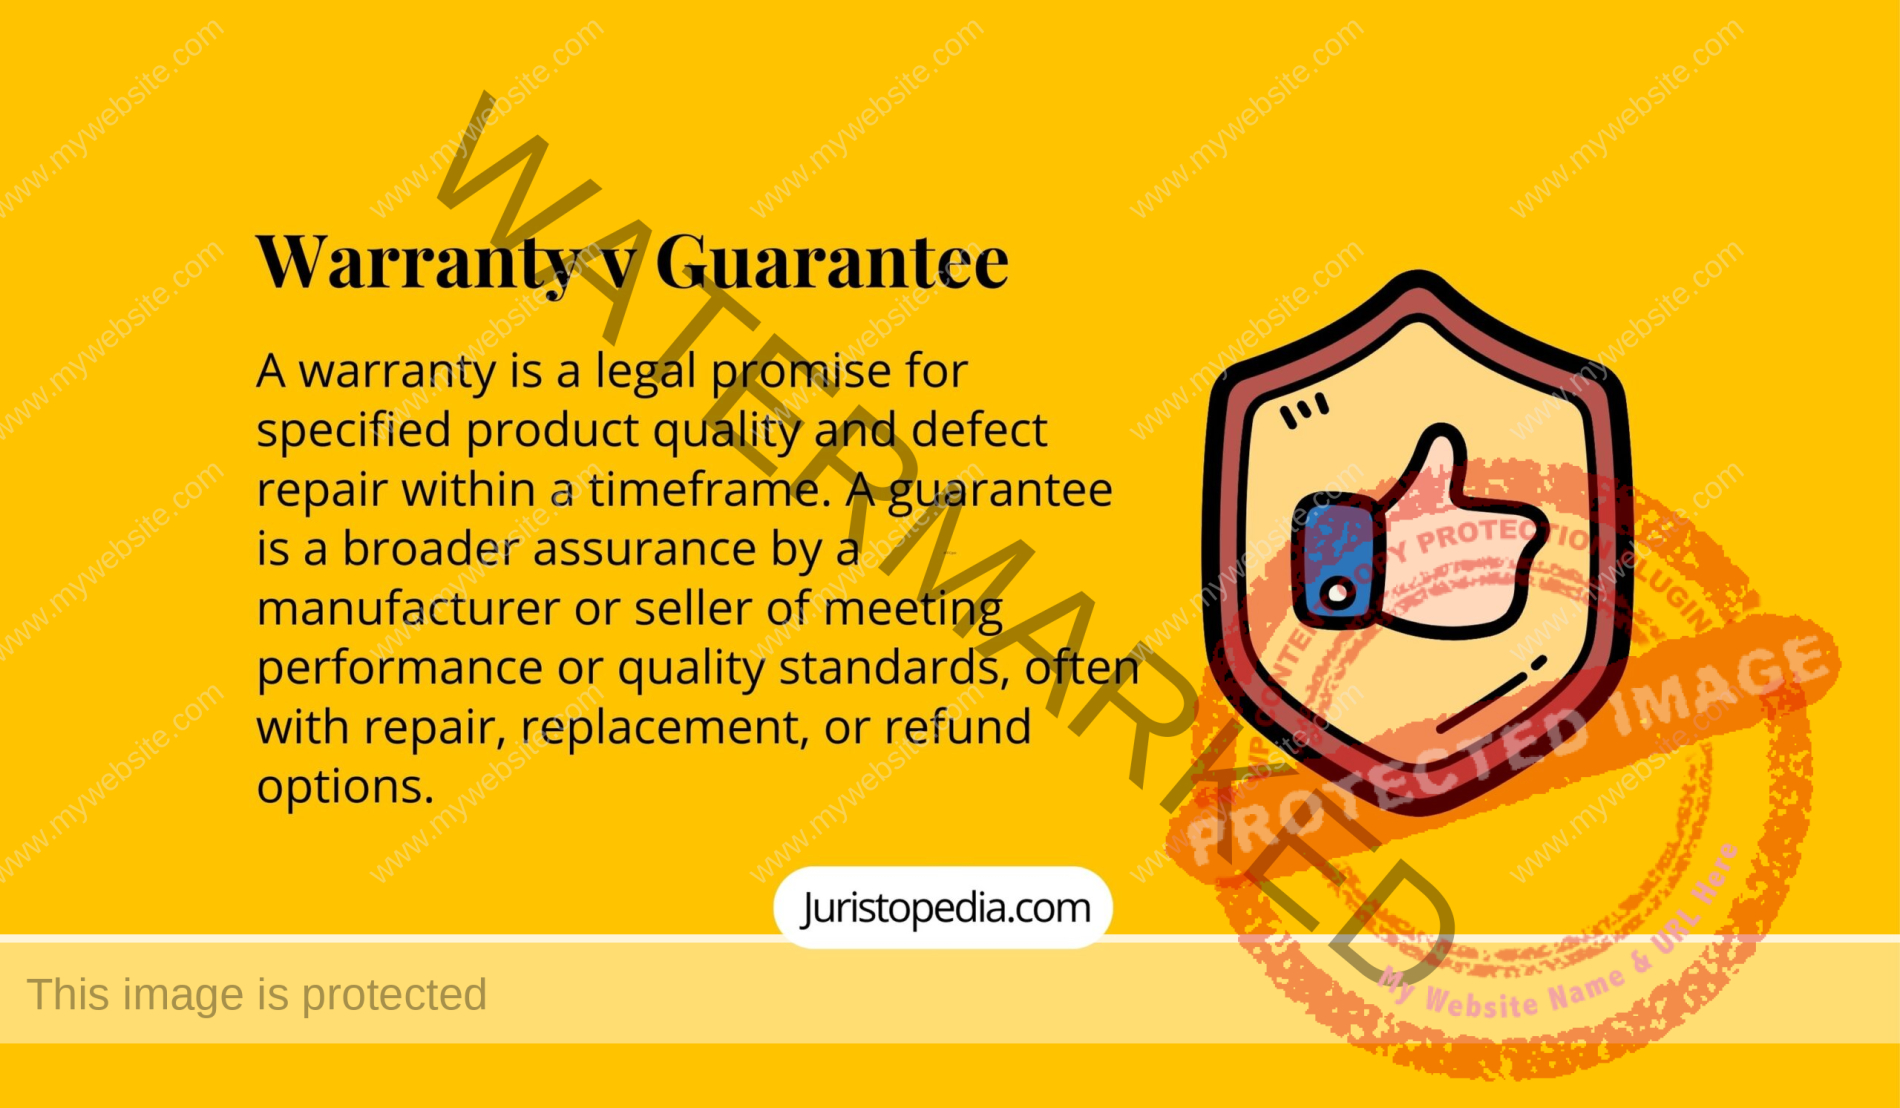 Warranty v Guarantee - product liability - defect - repair - quality standards - personal injury - breach of warranty